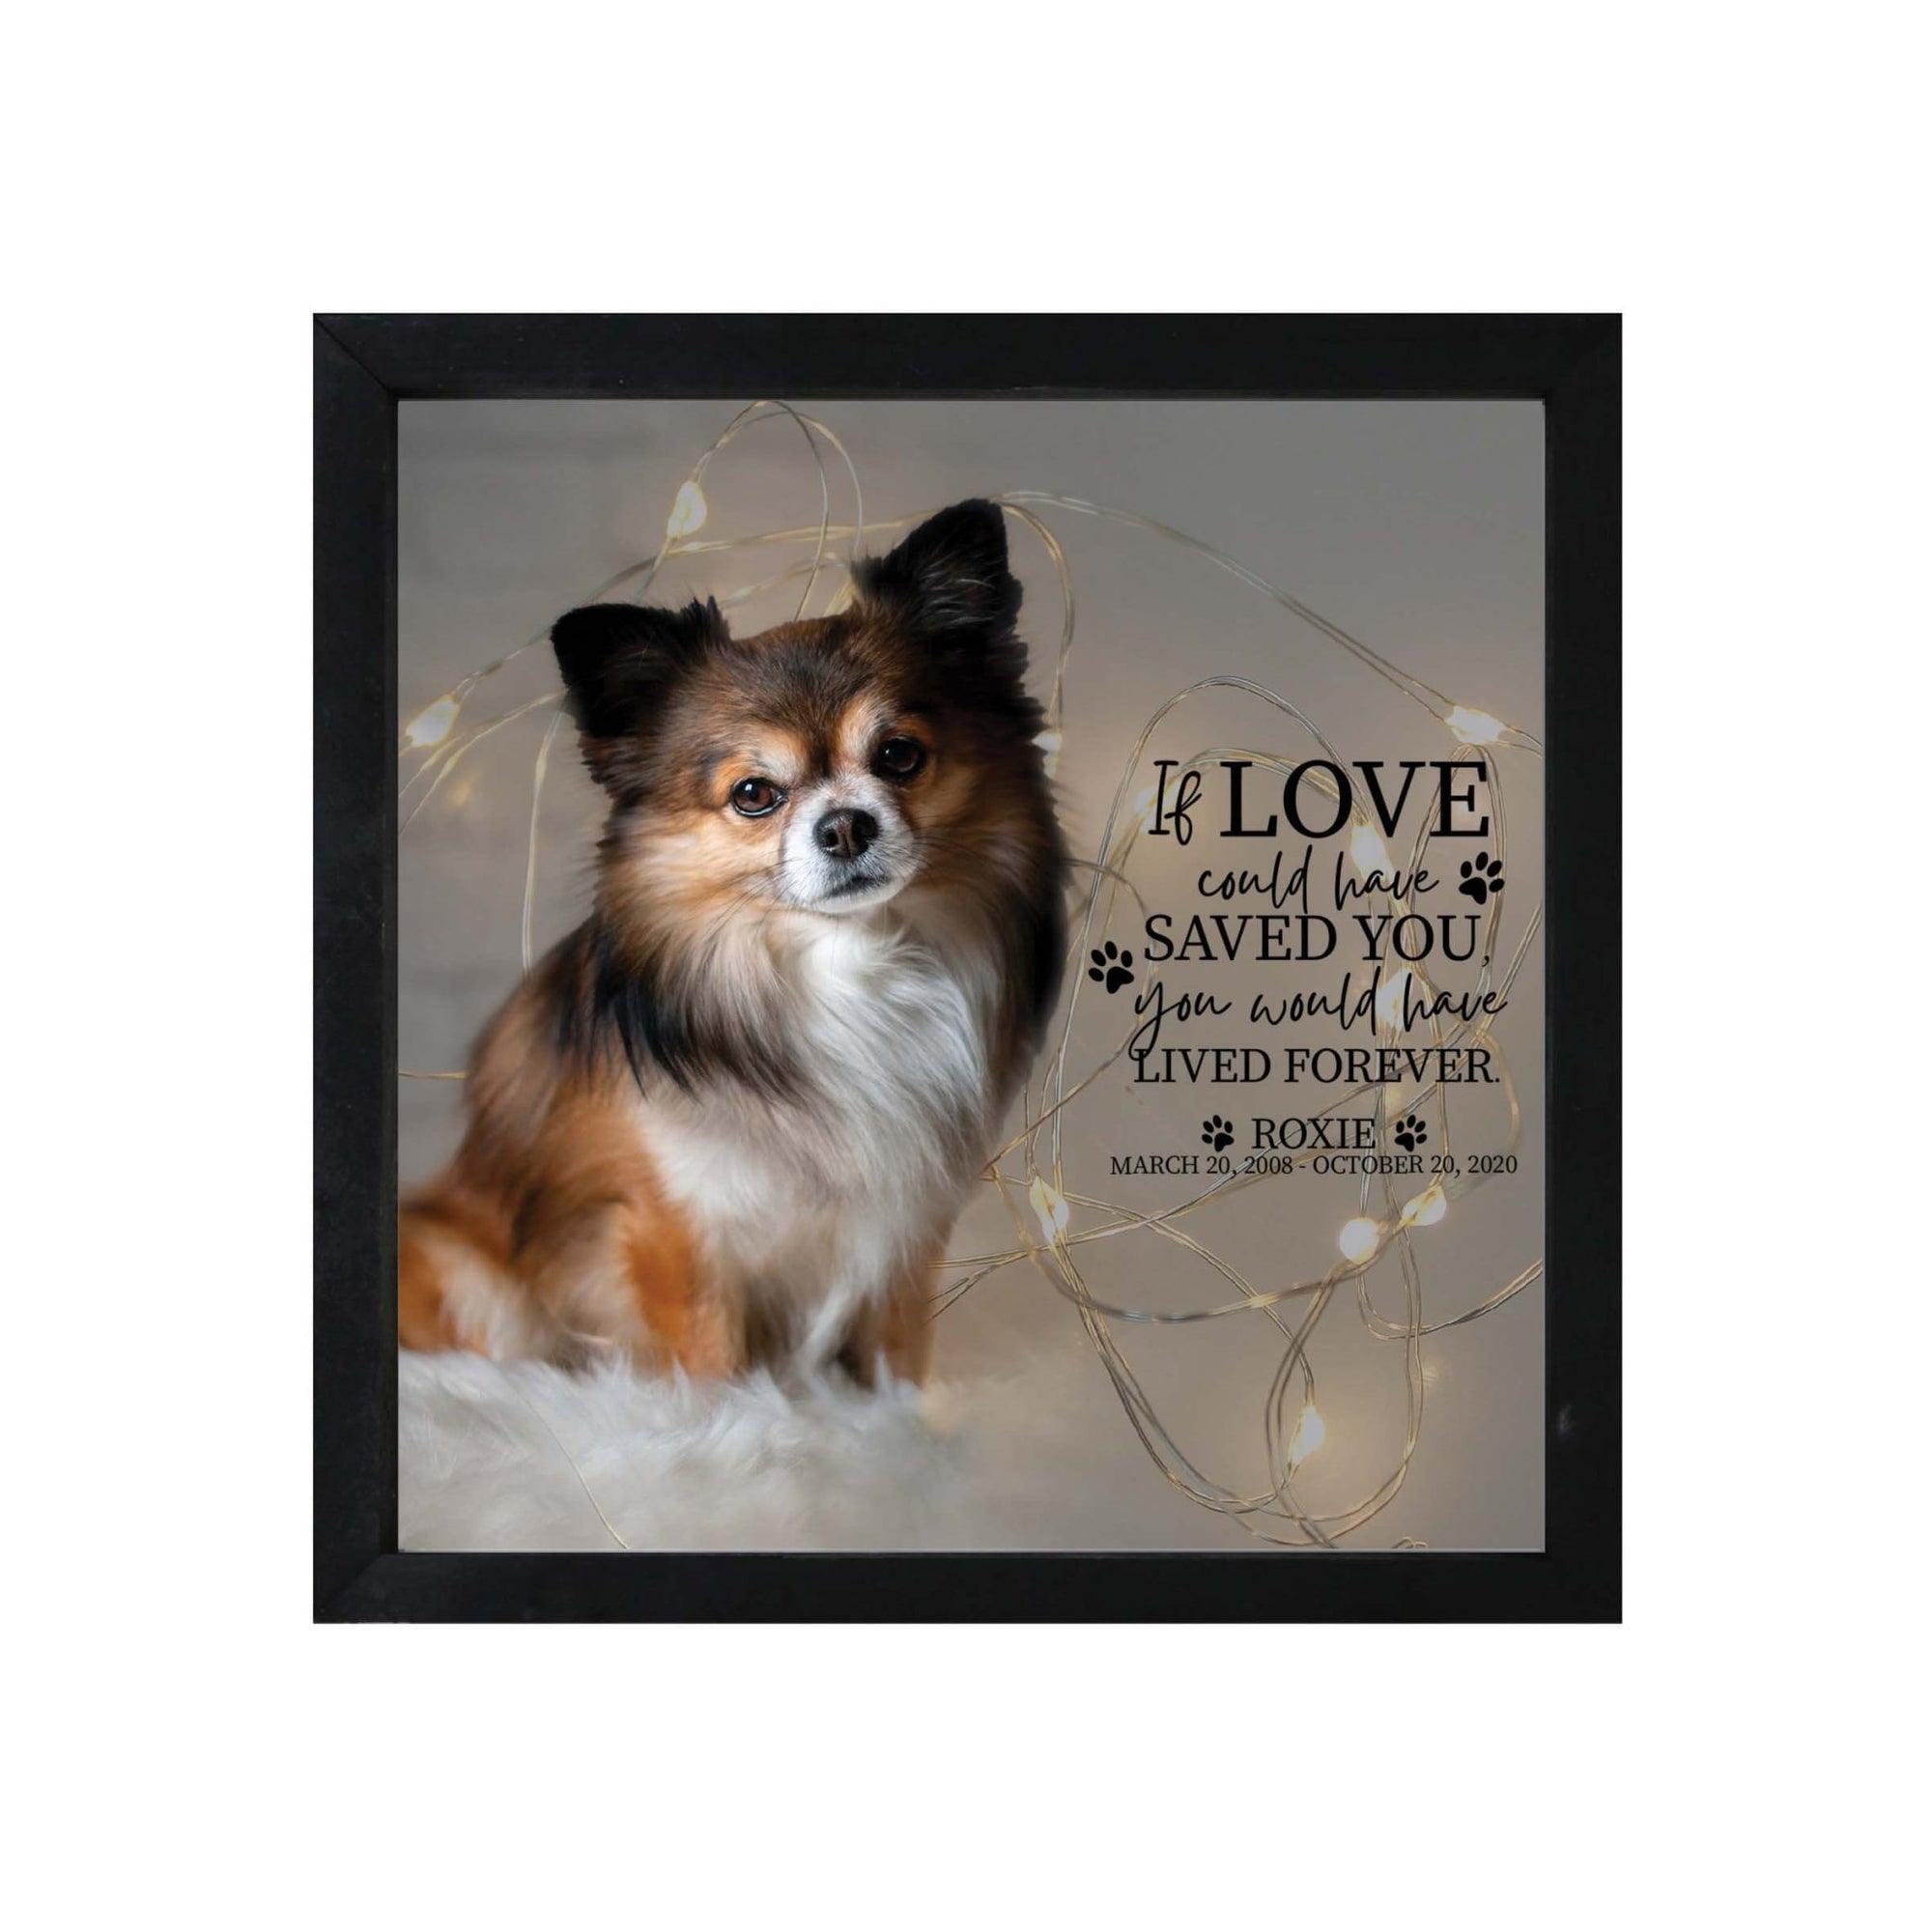 Custom Pet Memorial Framed Shadow Box Wall Décor for the Loss of Beloved Pet - If Love Could Have - LifeSong Milestones